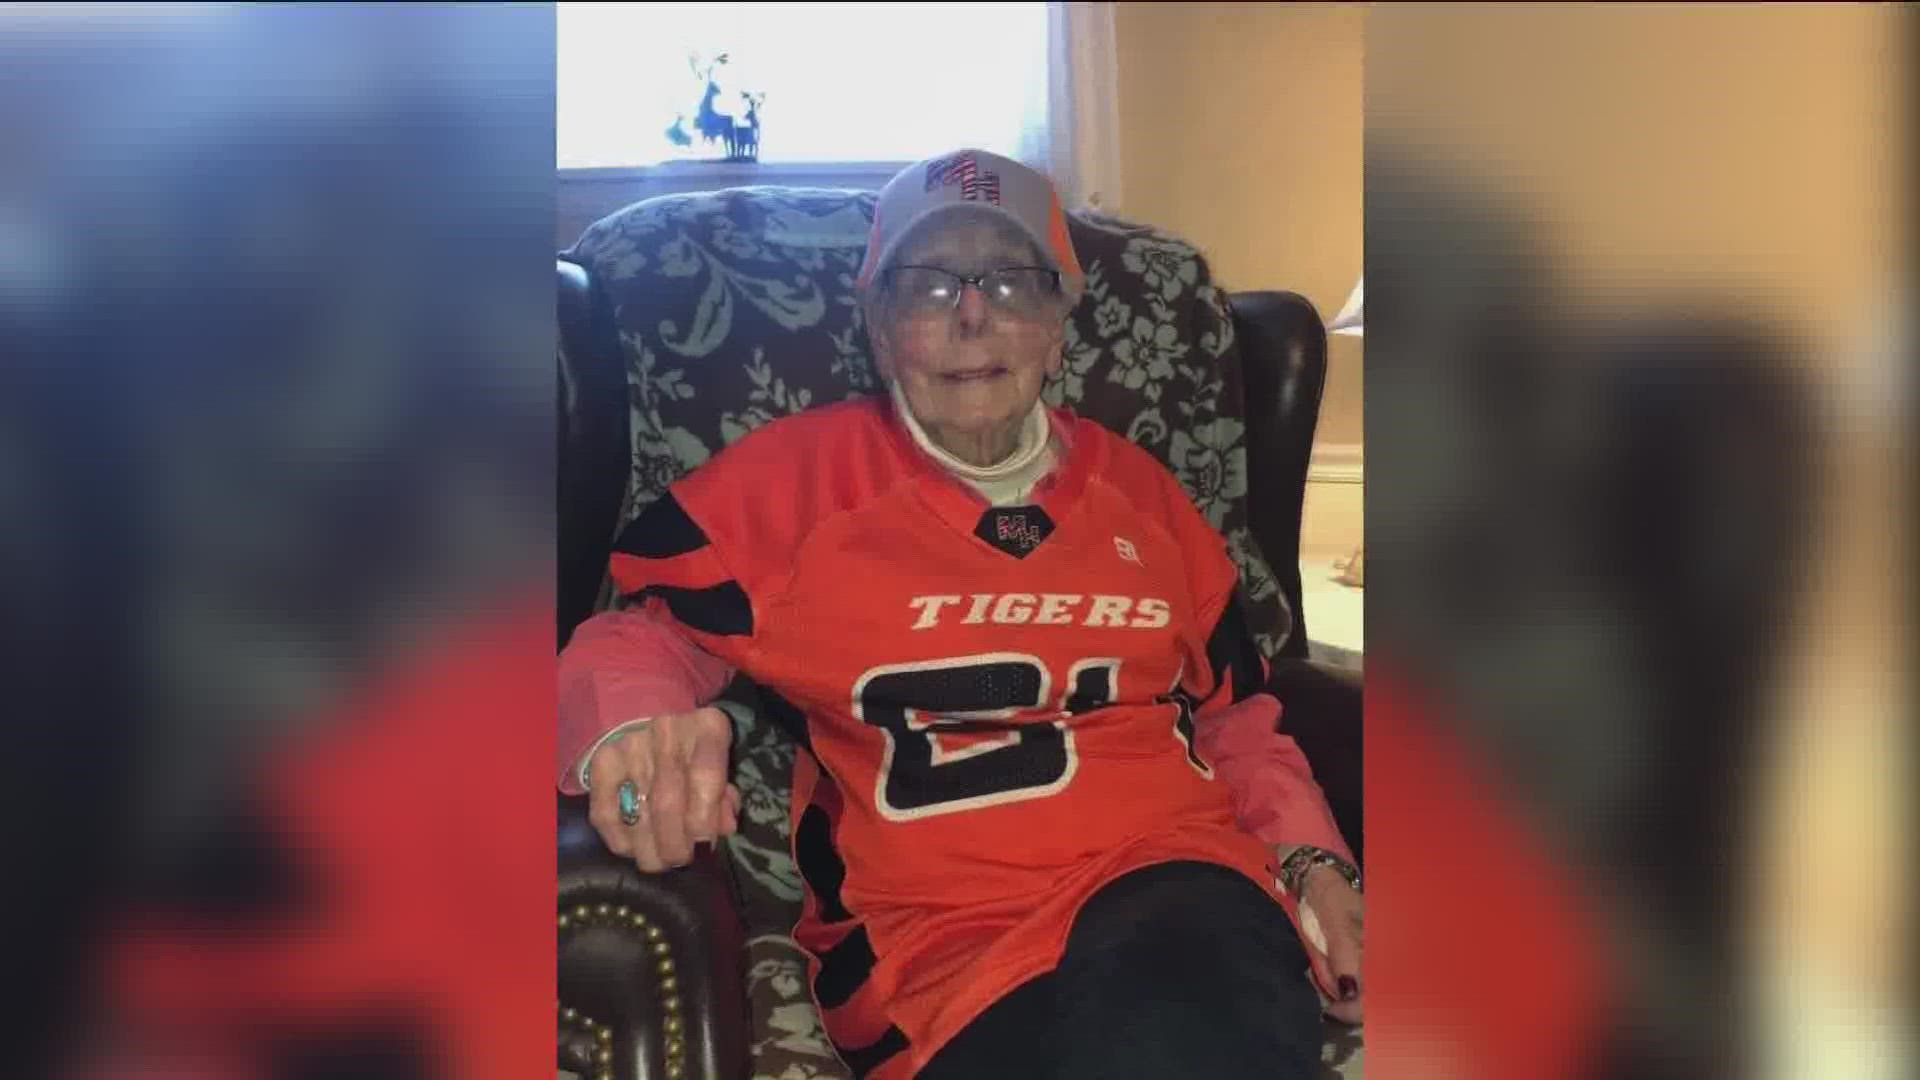 Sally Pyburn has lived in Mountain Home for fifty years, and she's a big fan of the Tigers. She was a guest of honor at a recent game, inspiring everyone.